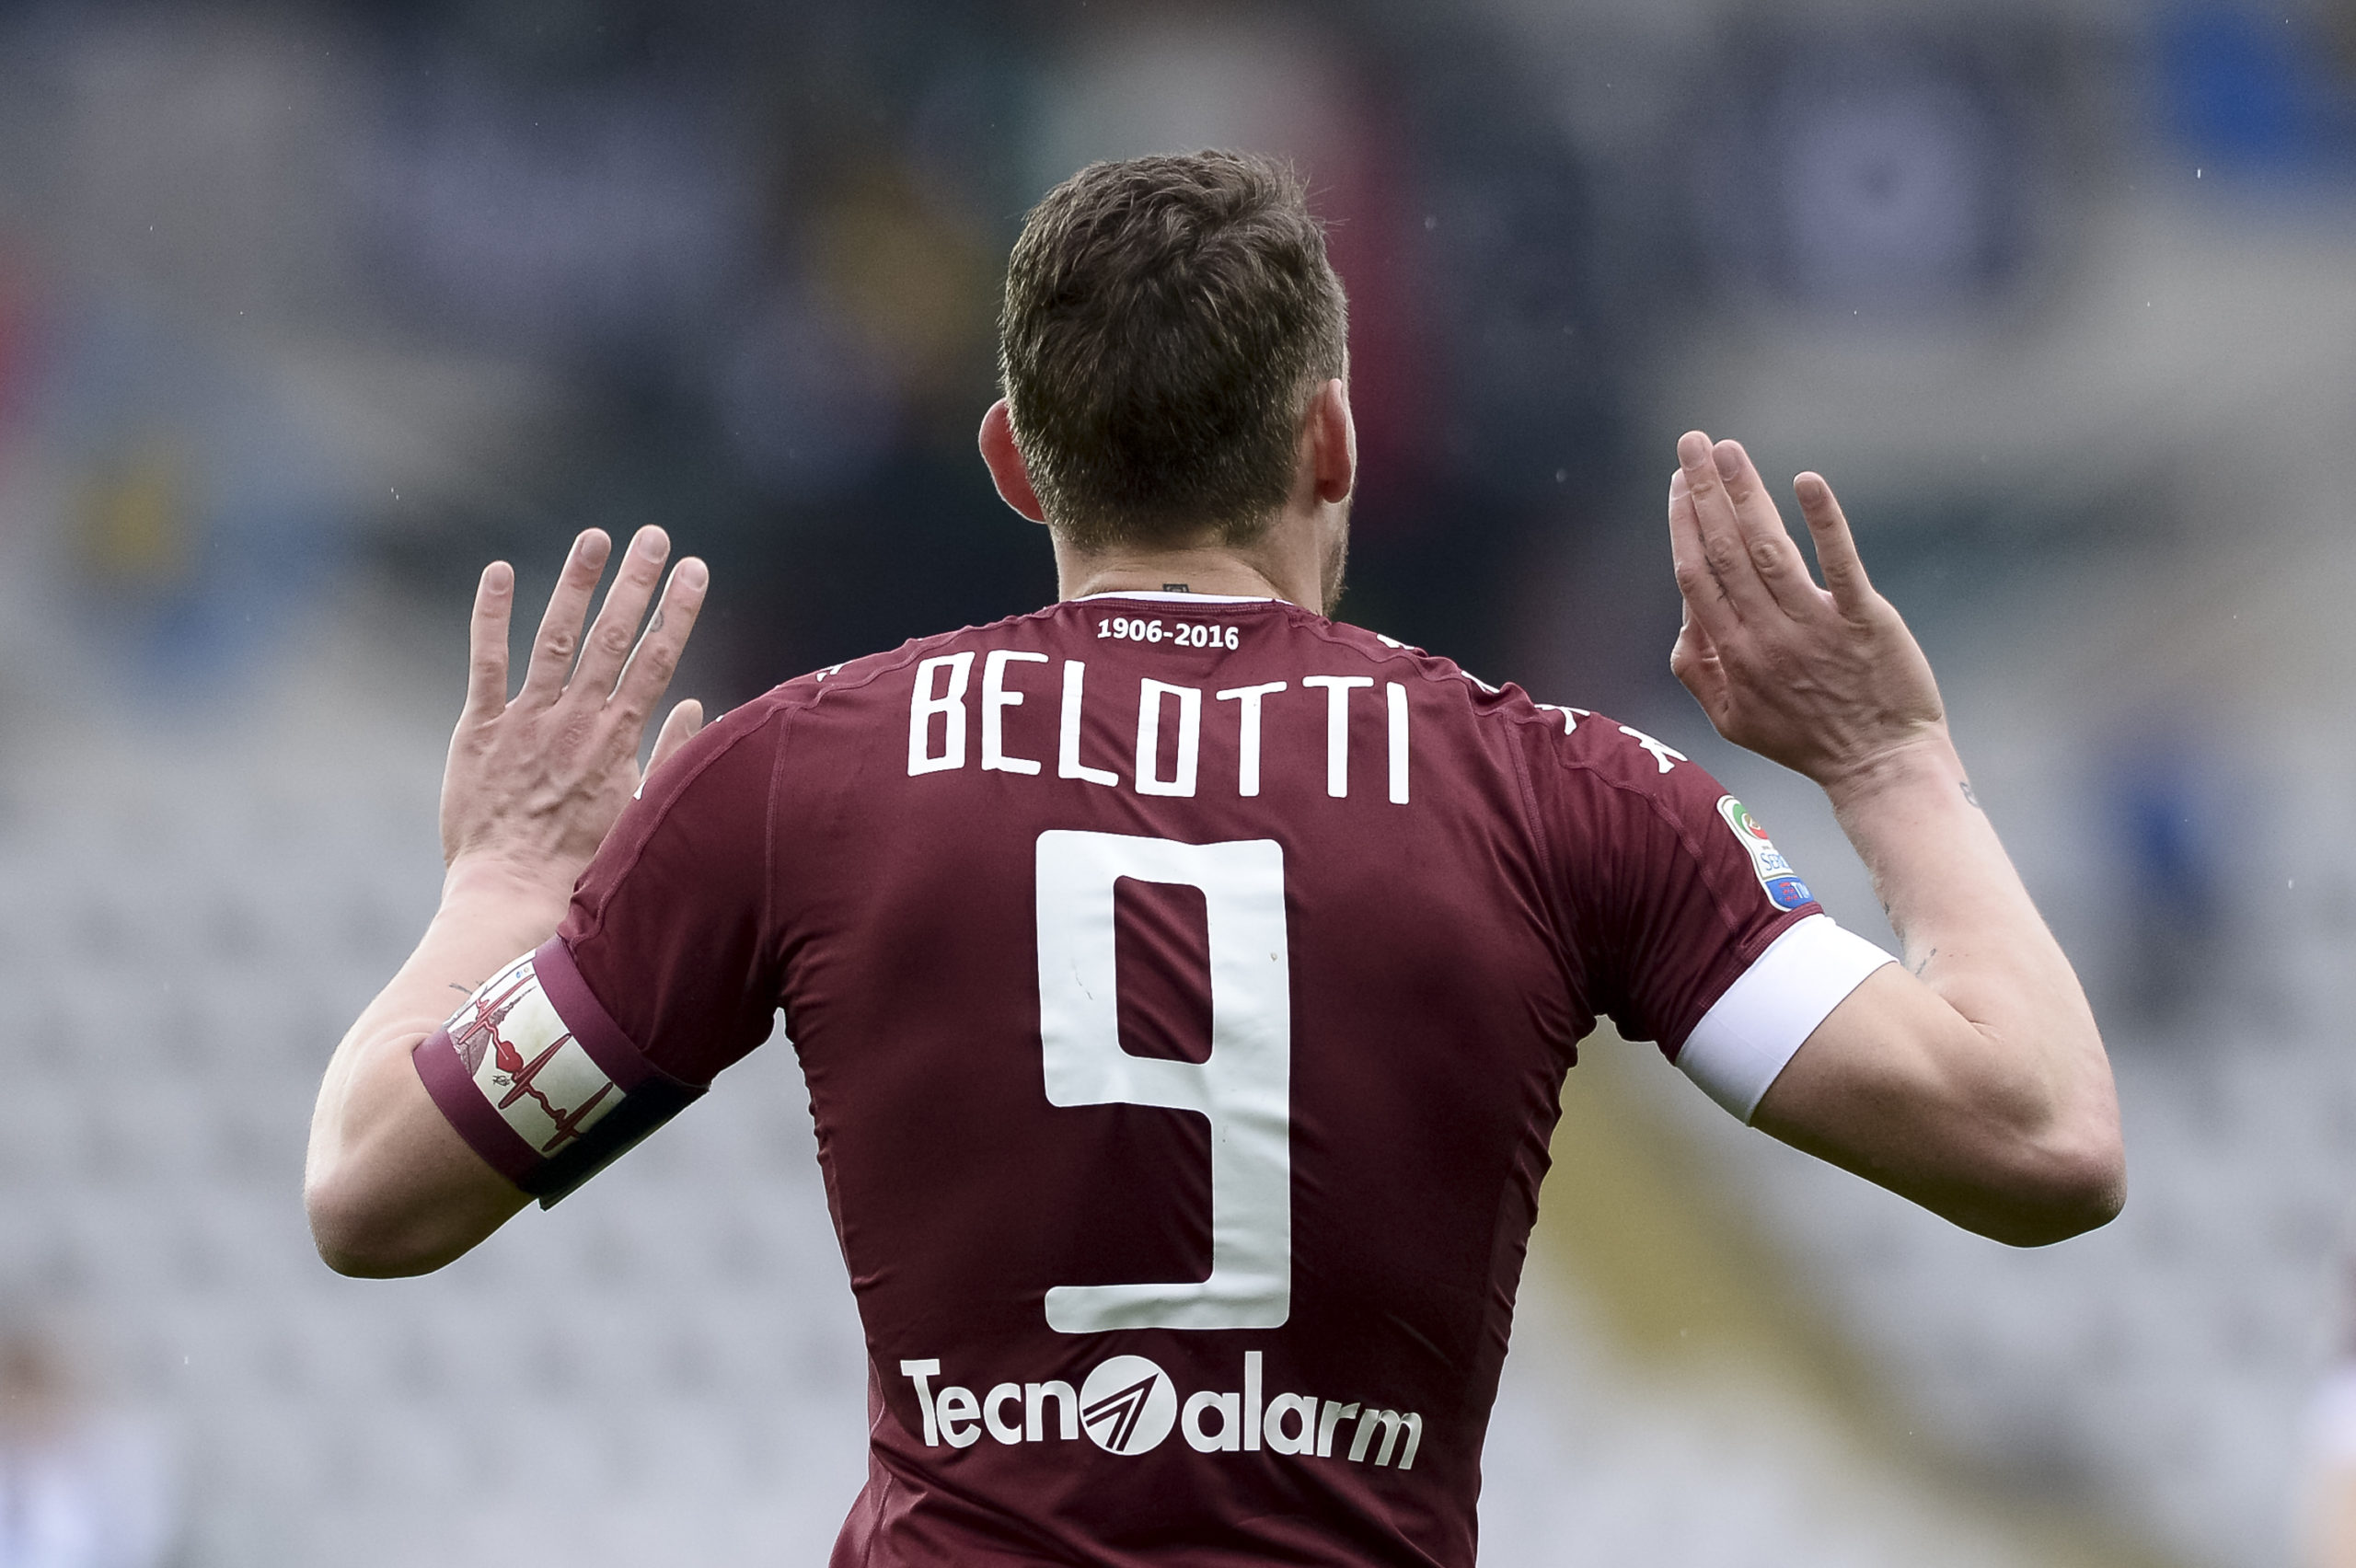 Free agent Andrea Belotti is inching closer to a transfer to Roma following a rather hushed summer window that saw no teams materialize interest in him.